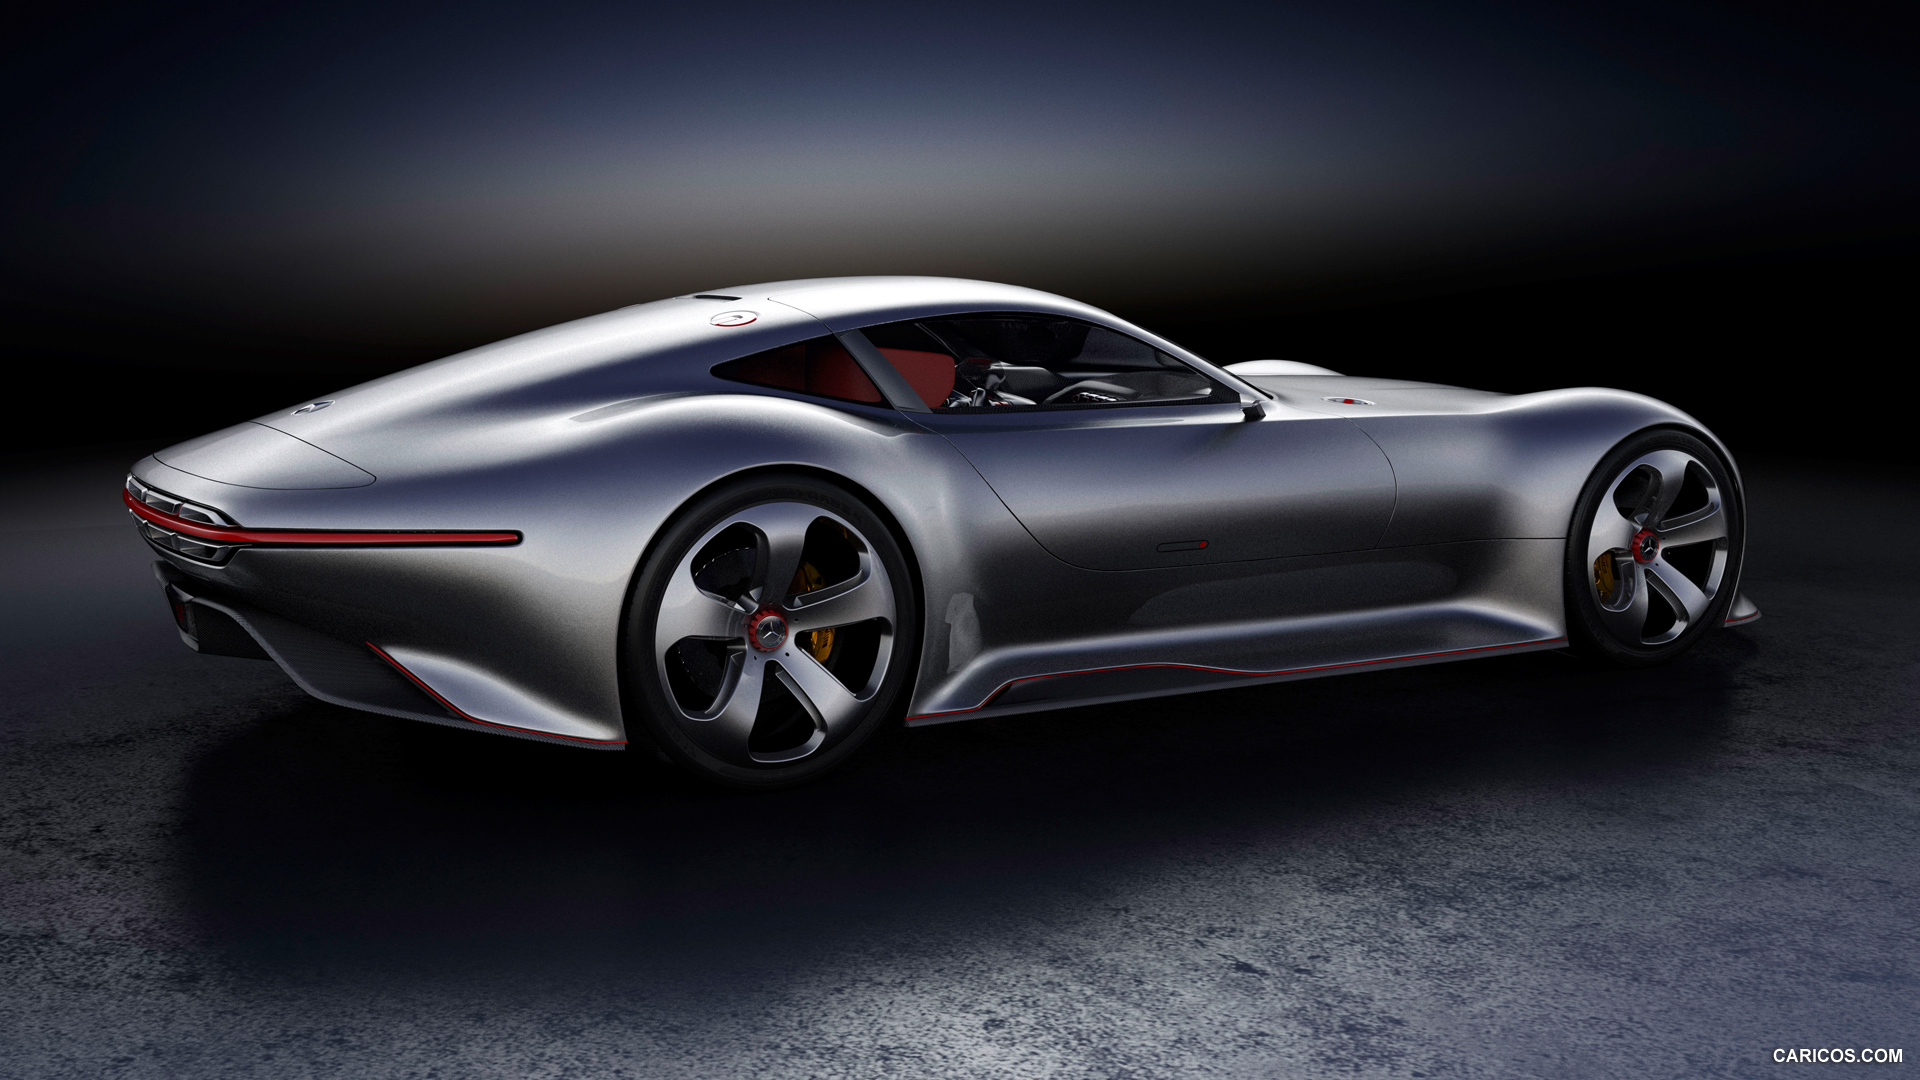 Mercedes-Benz AMG Vision Gran Turismo Concept (2013)  - Side, #19 of 25